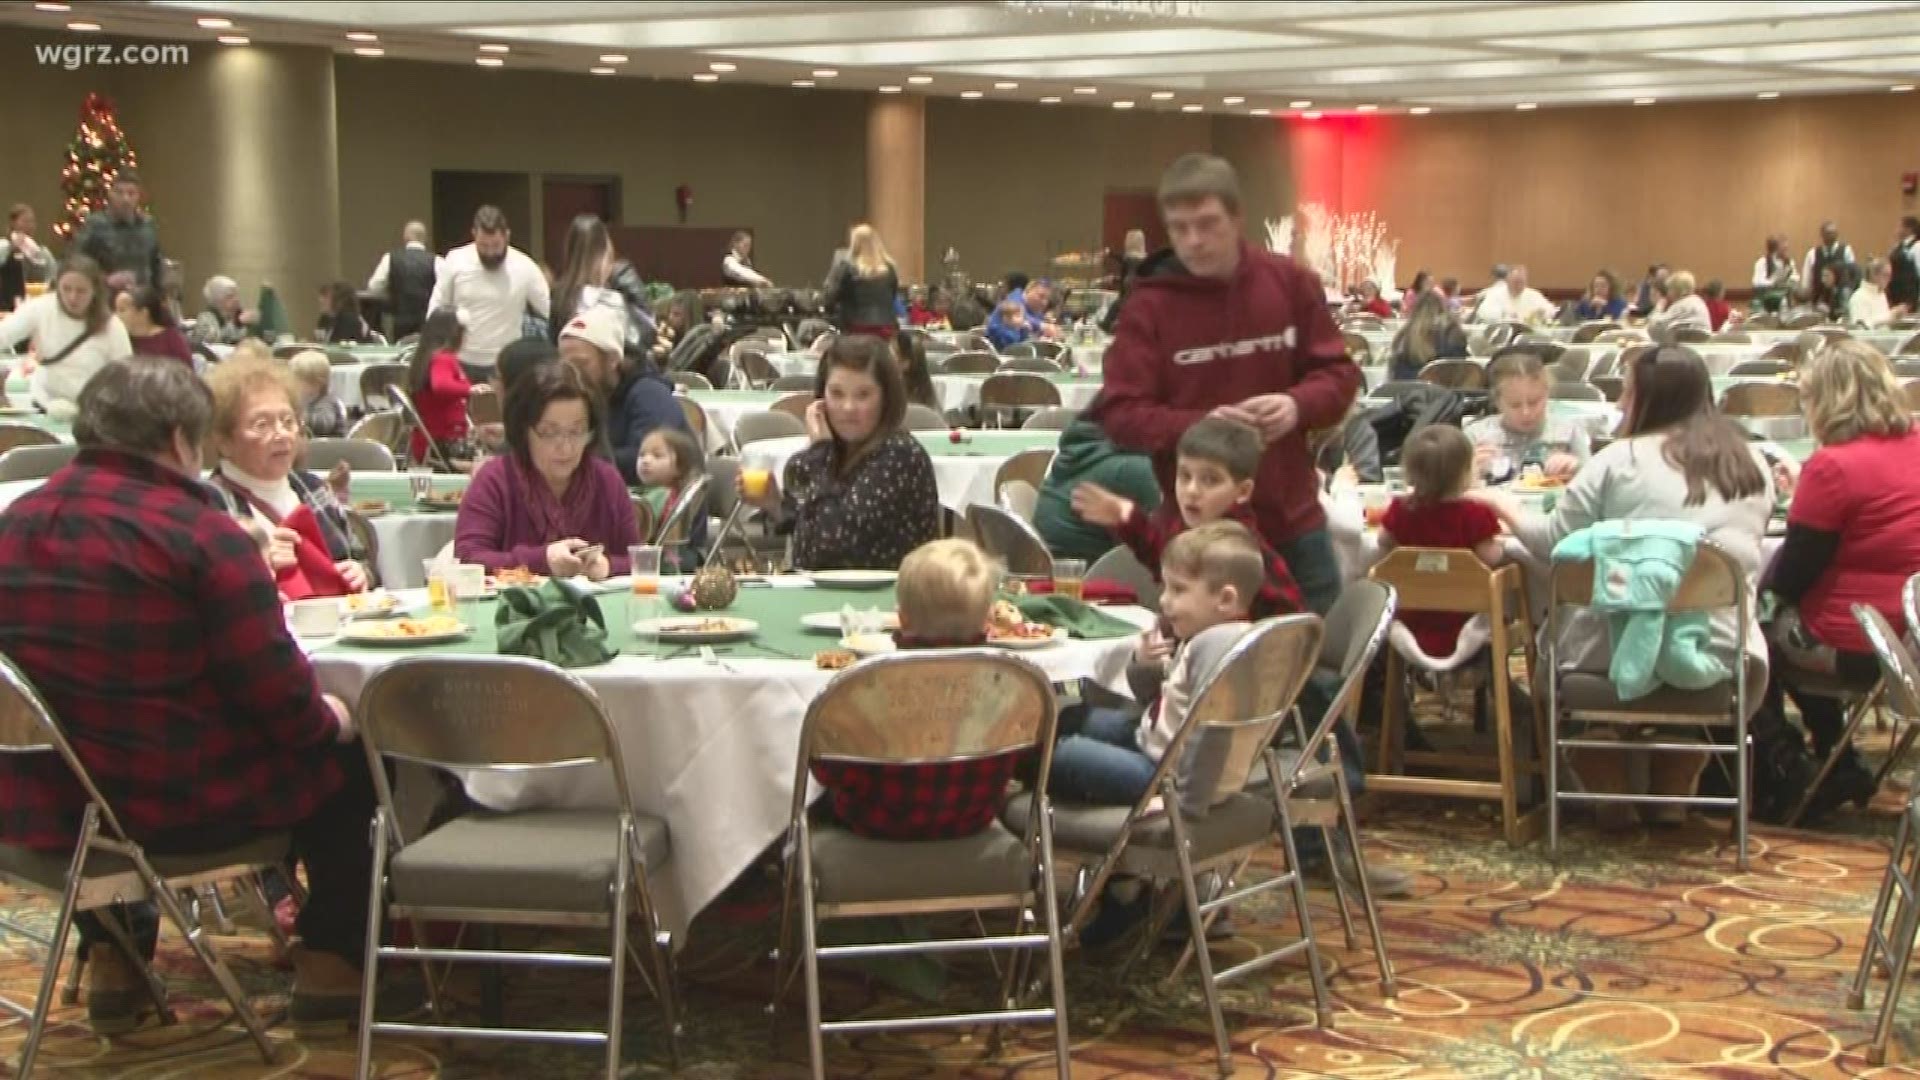 Festival of Trees returns to Buffalo with black tie event